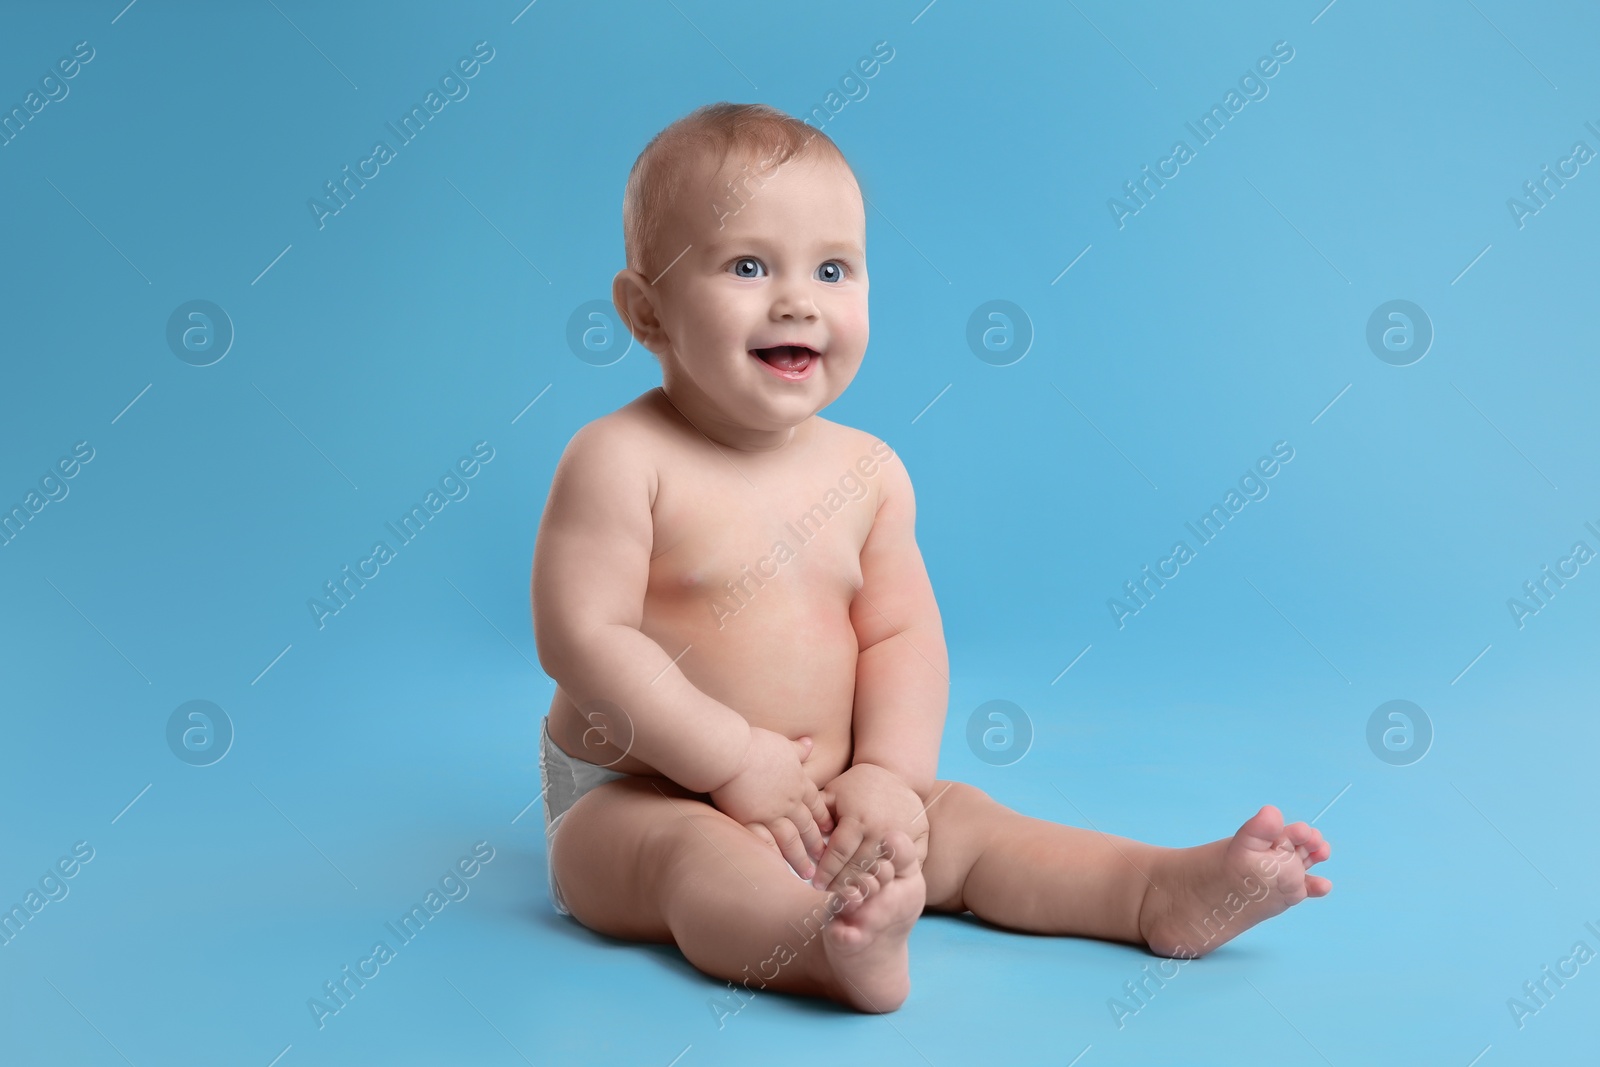 Photo of Cute baby in dry soft diaper sitting on light blue background